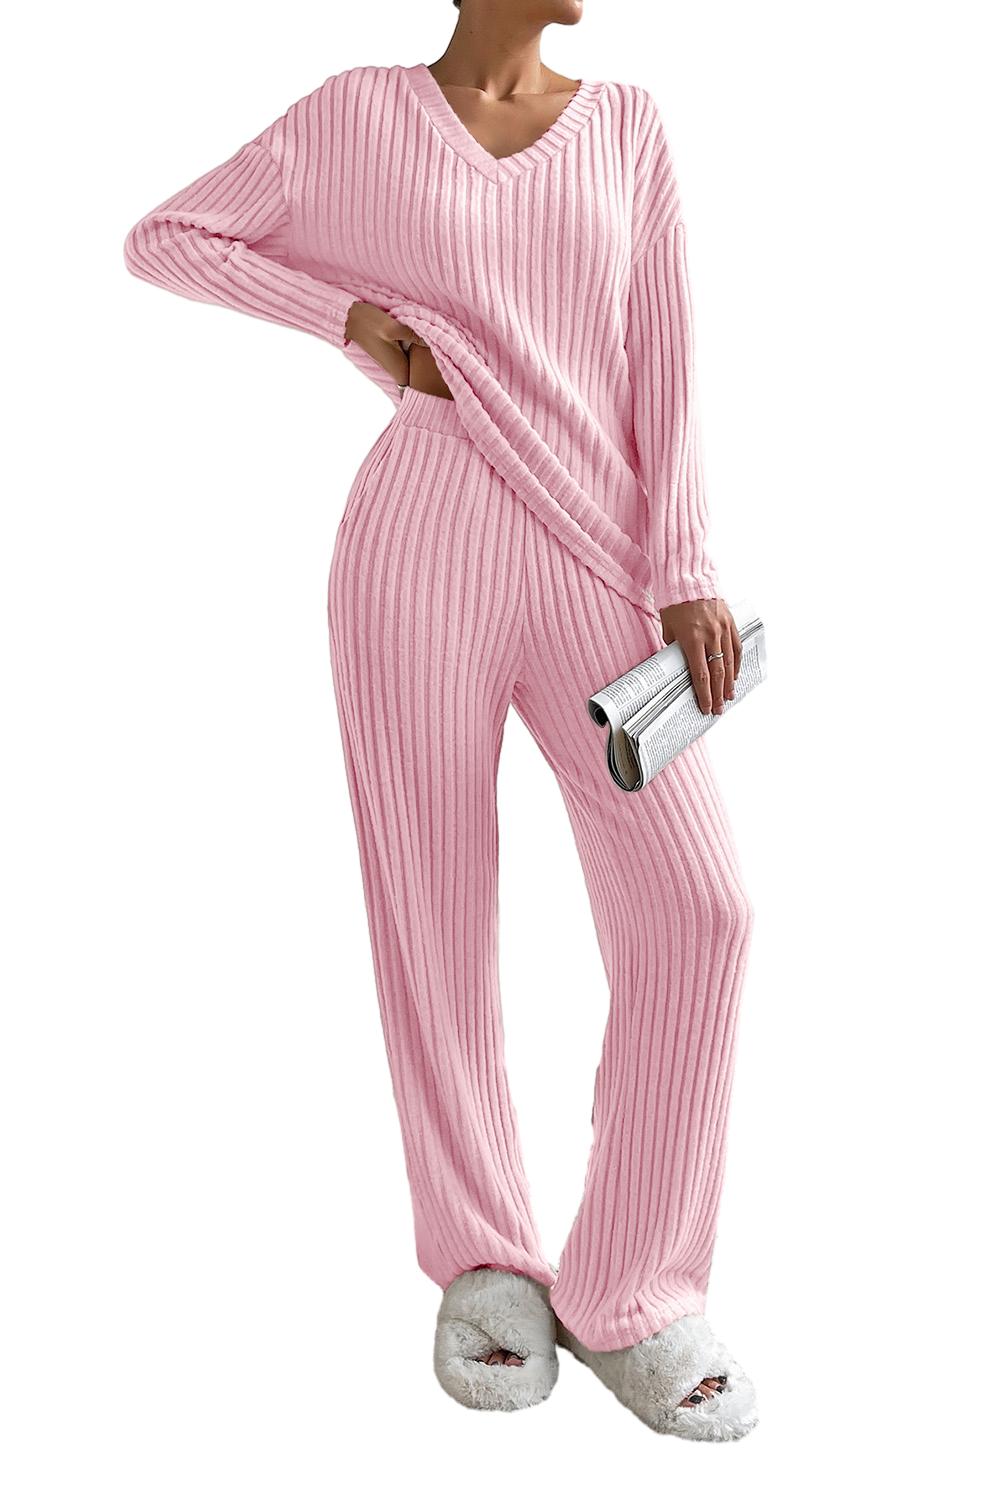 Plain Ribbed Loose Fit Two-Piece Lounge Set - Nicole Lee Apparel